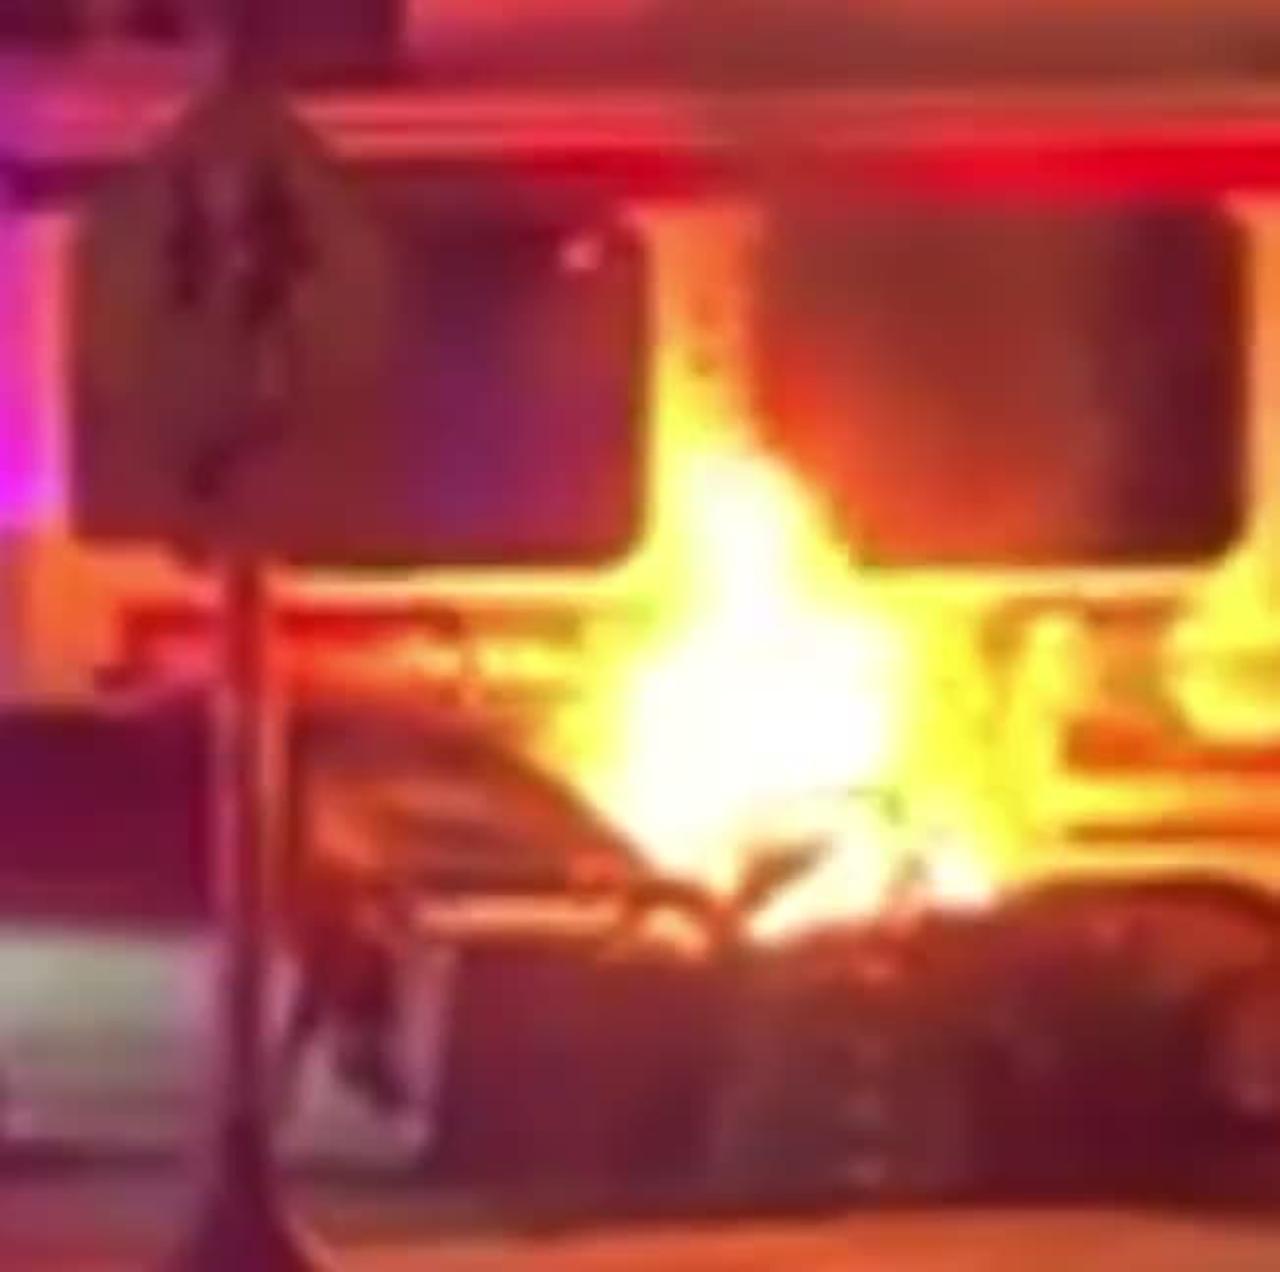 A driver has died after crashing into a SEPTA trolley and the vehicle catching fire, in West